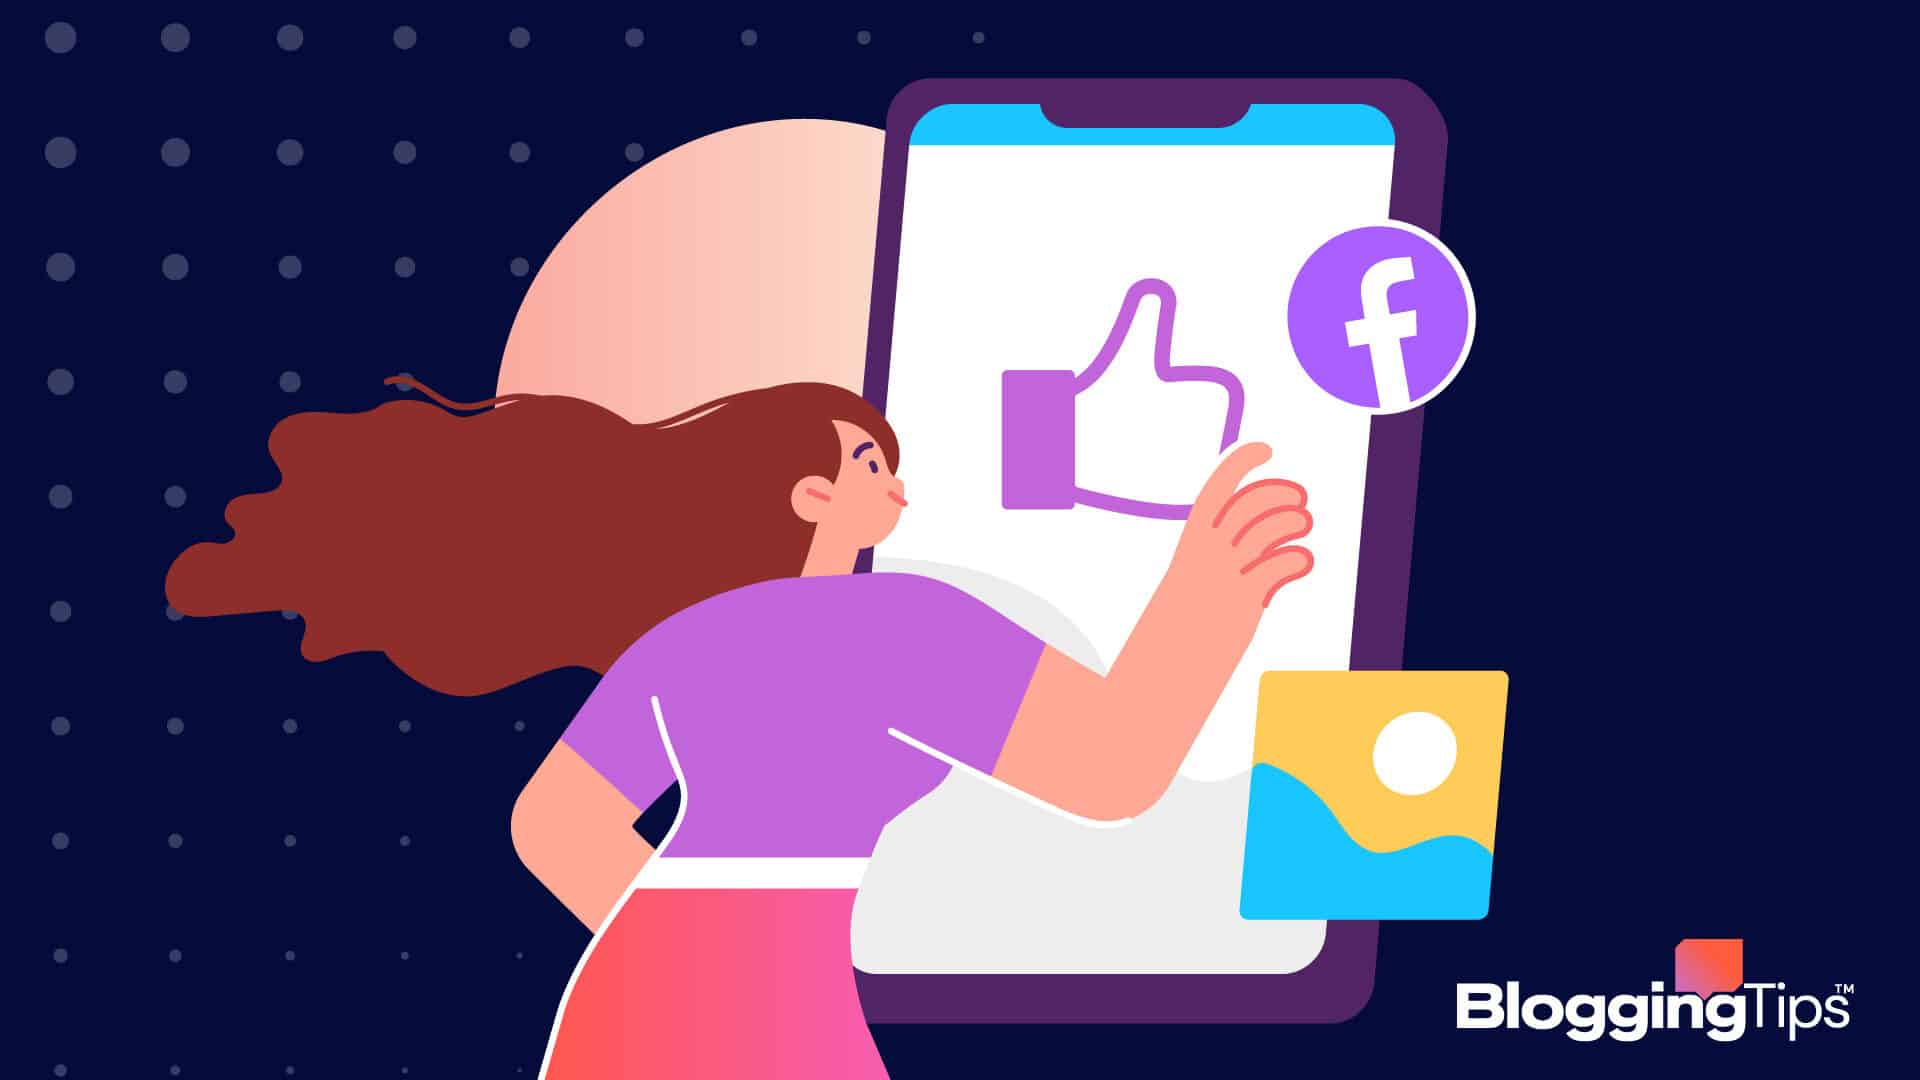 vector graphic showing an illustration of a woman sharing on facebook stories